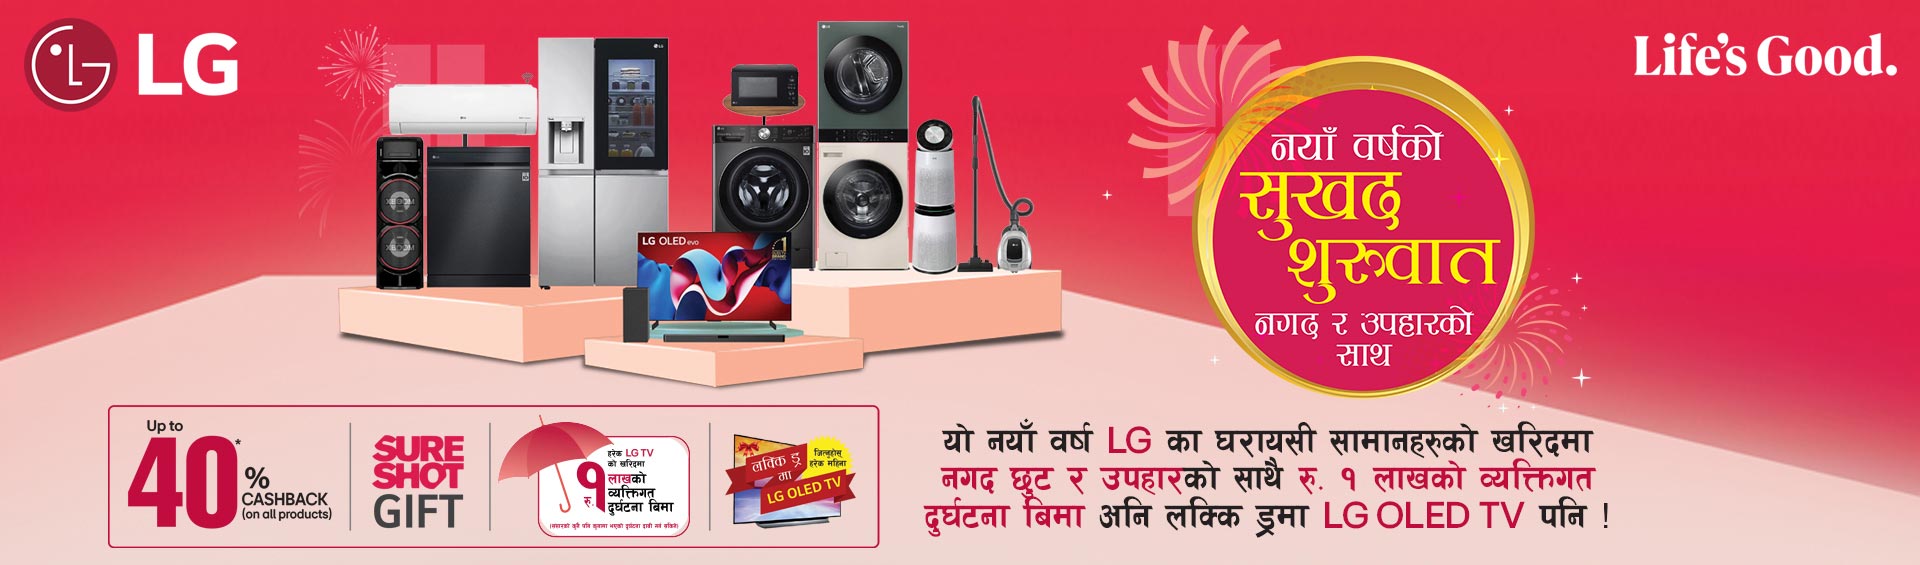 LG New Year Offer 2081